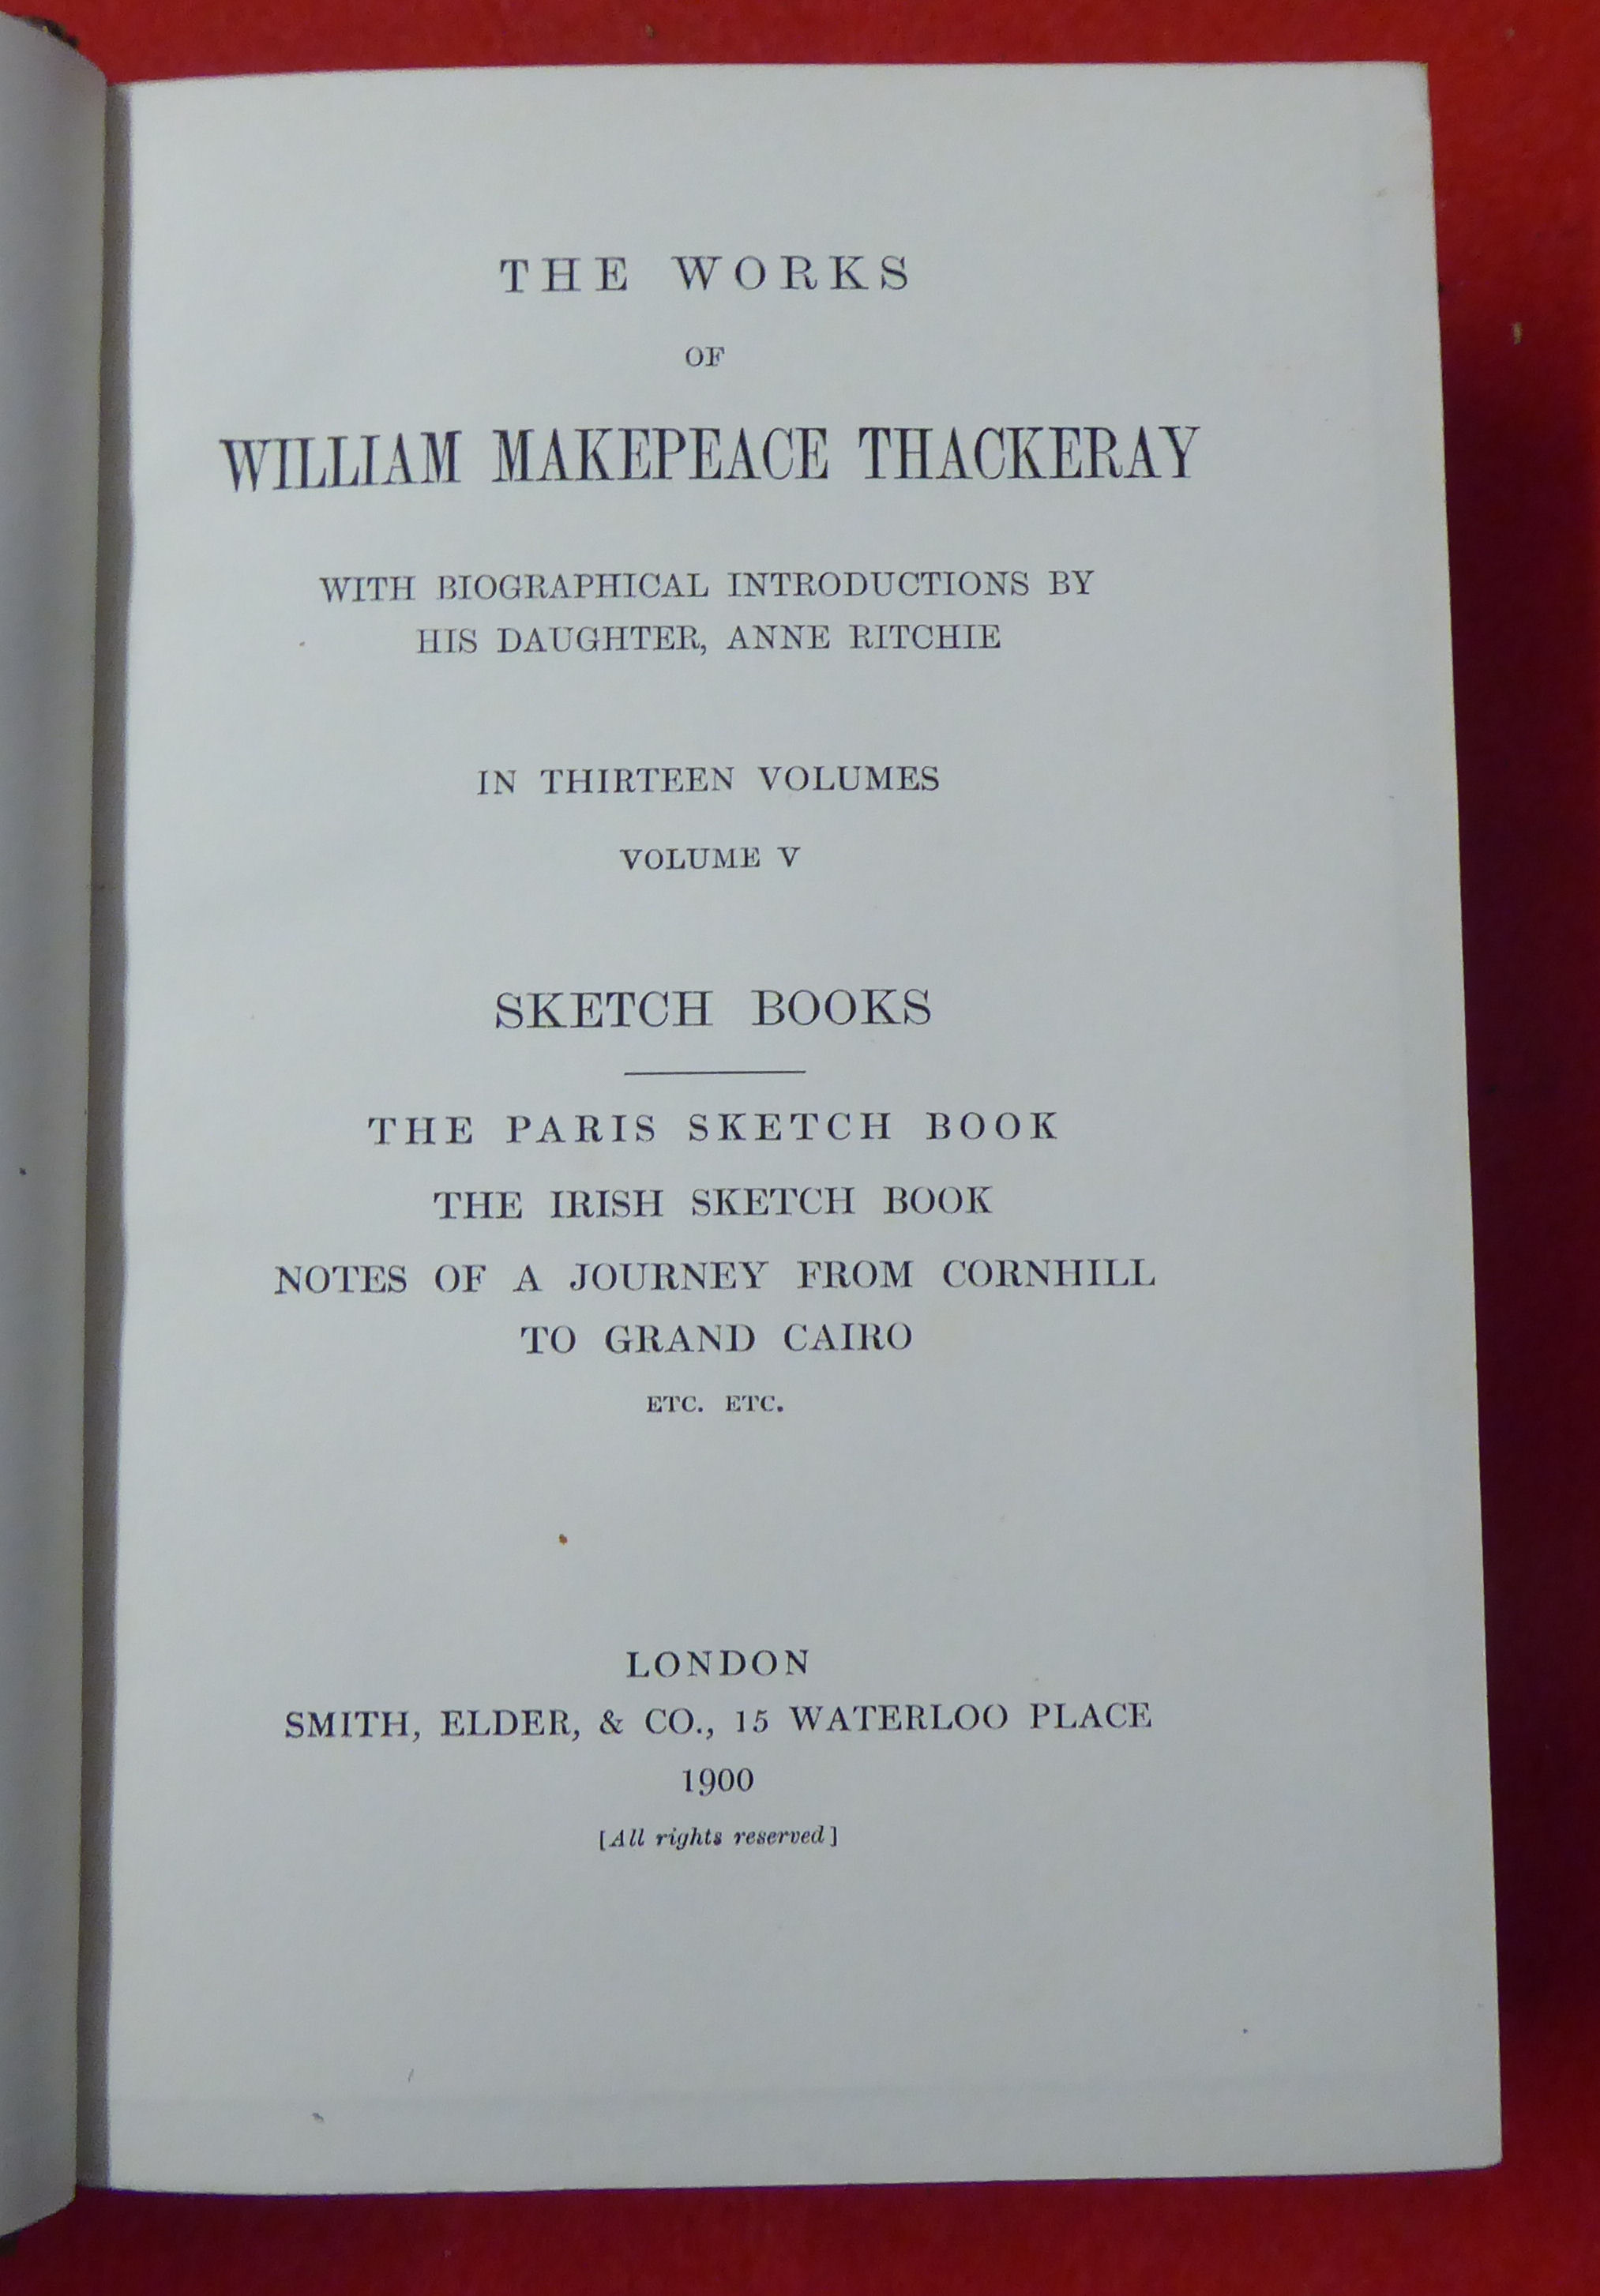 Books: 'The Works of William Makepeace Thackeray'  dated 1900, in thirteen volumes  (volume seven - Image 8 of 16